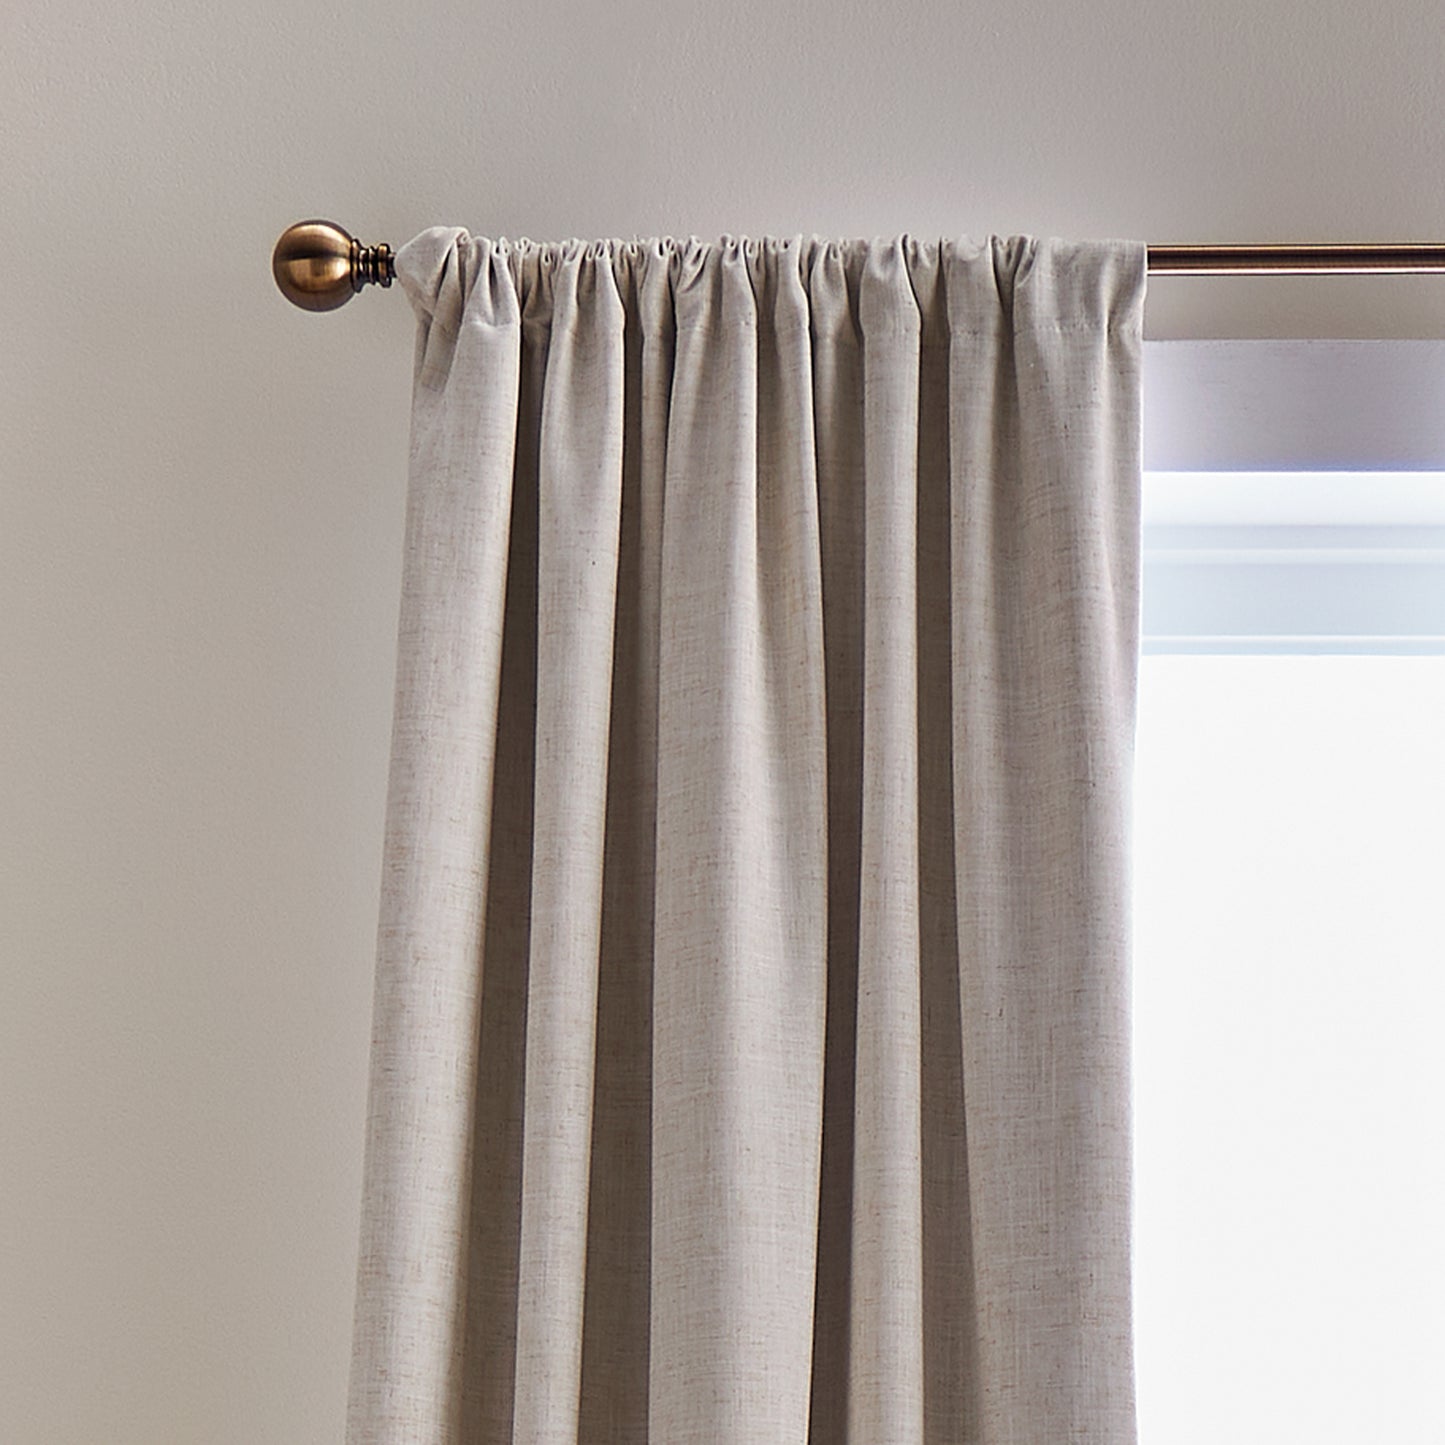 DKNY Pure Retreat Lined Curtain Panel Pair